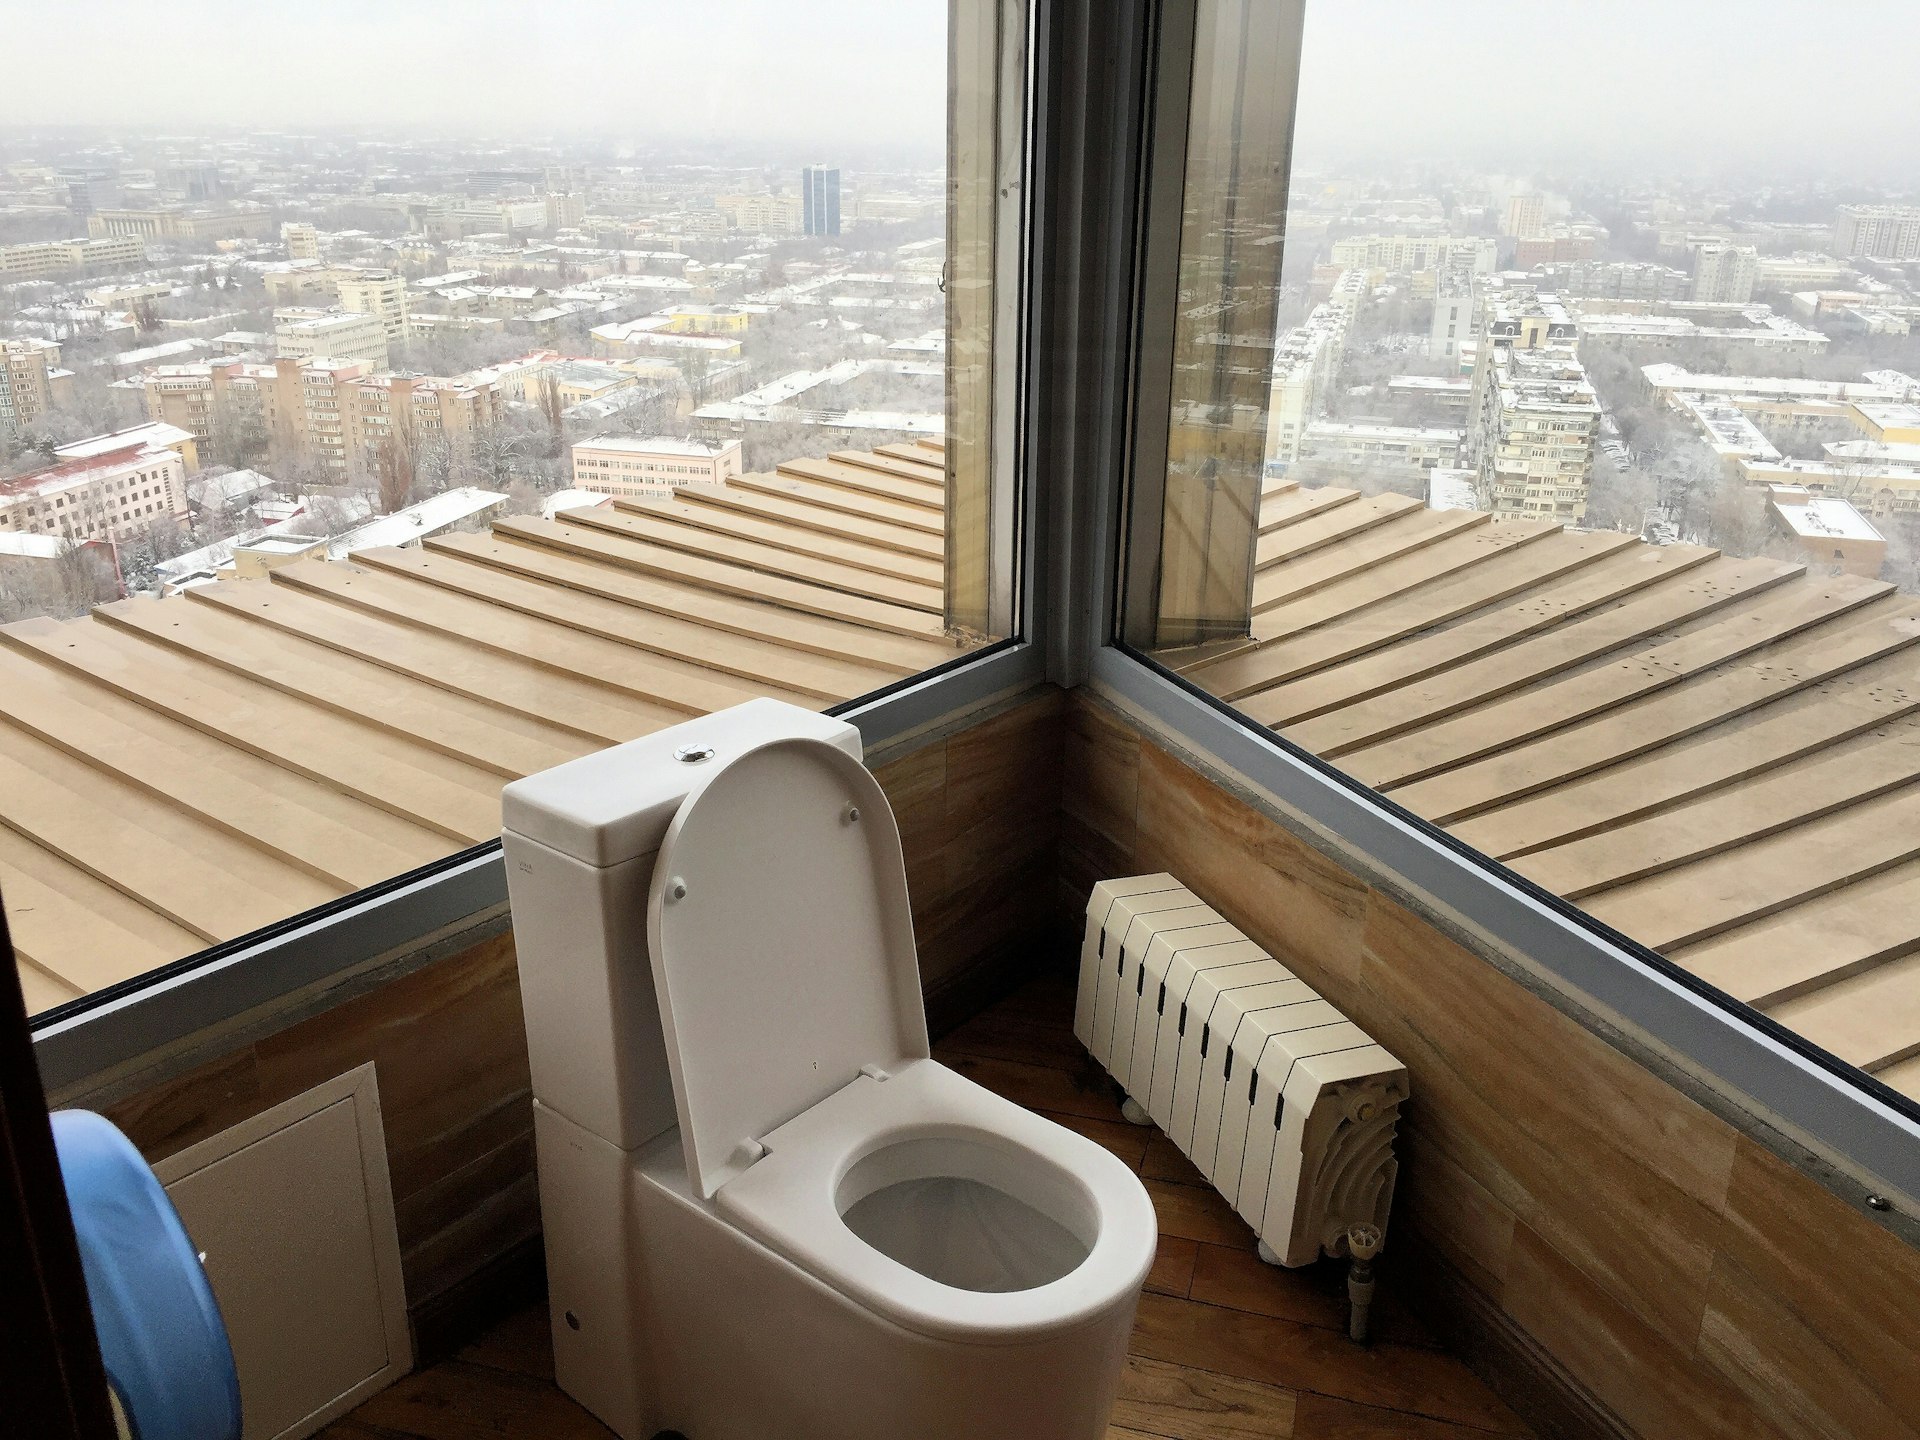 The bathroom of the Hotel Kazakhstan's top-floor restaurant. The toilet is surrounded by mid-length windows on all sides, with views looking out over the city.